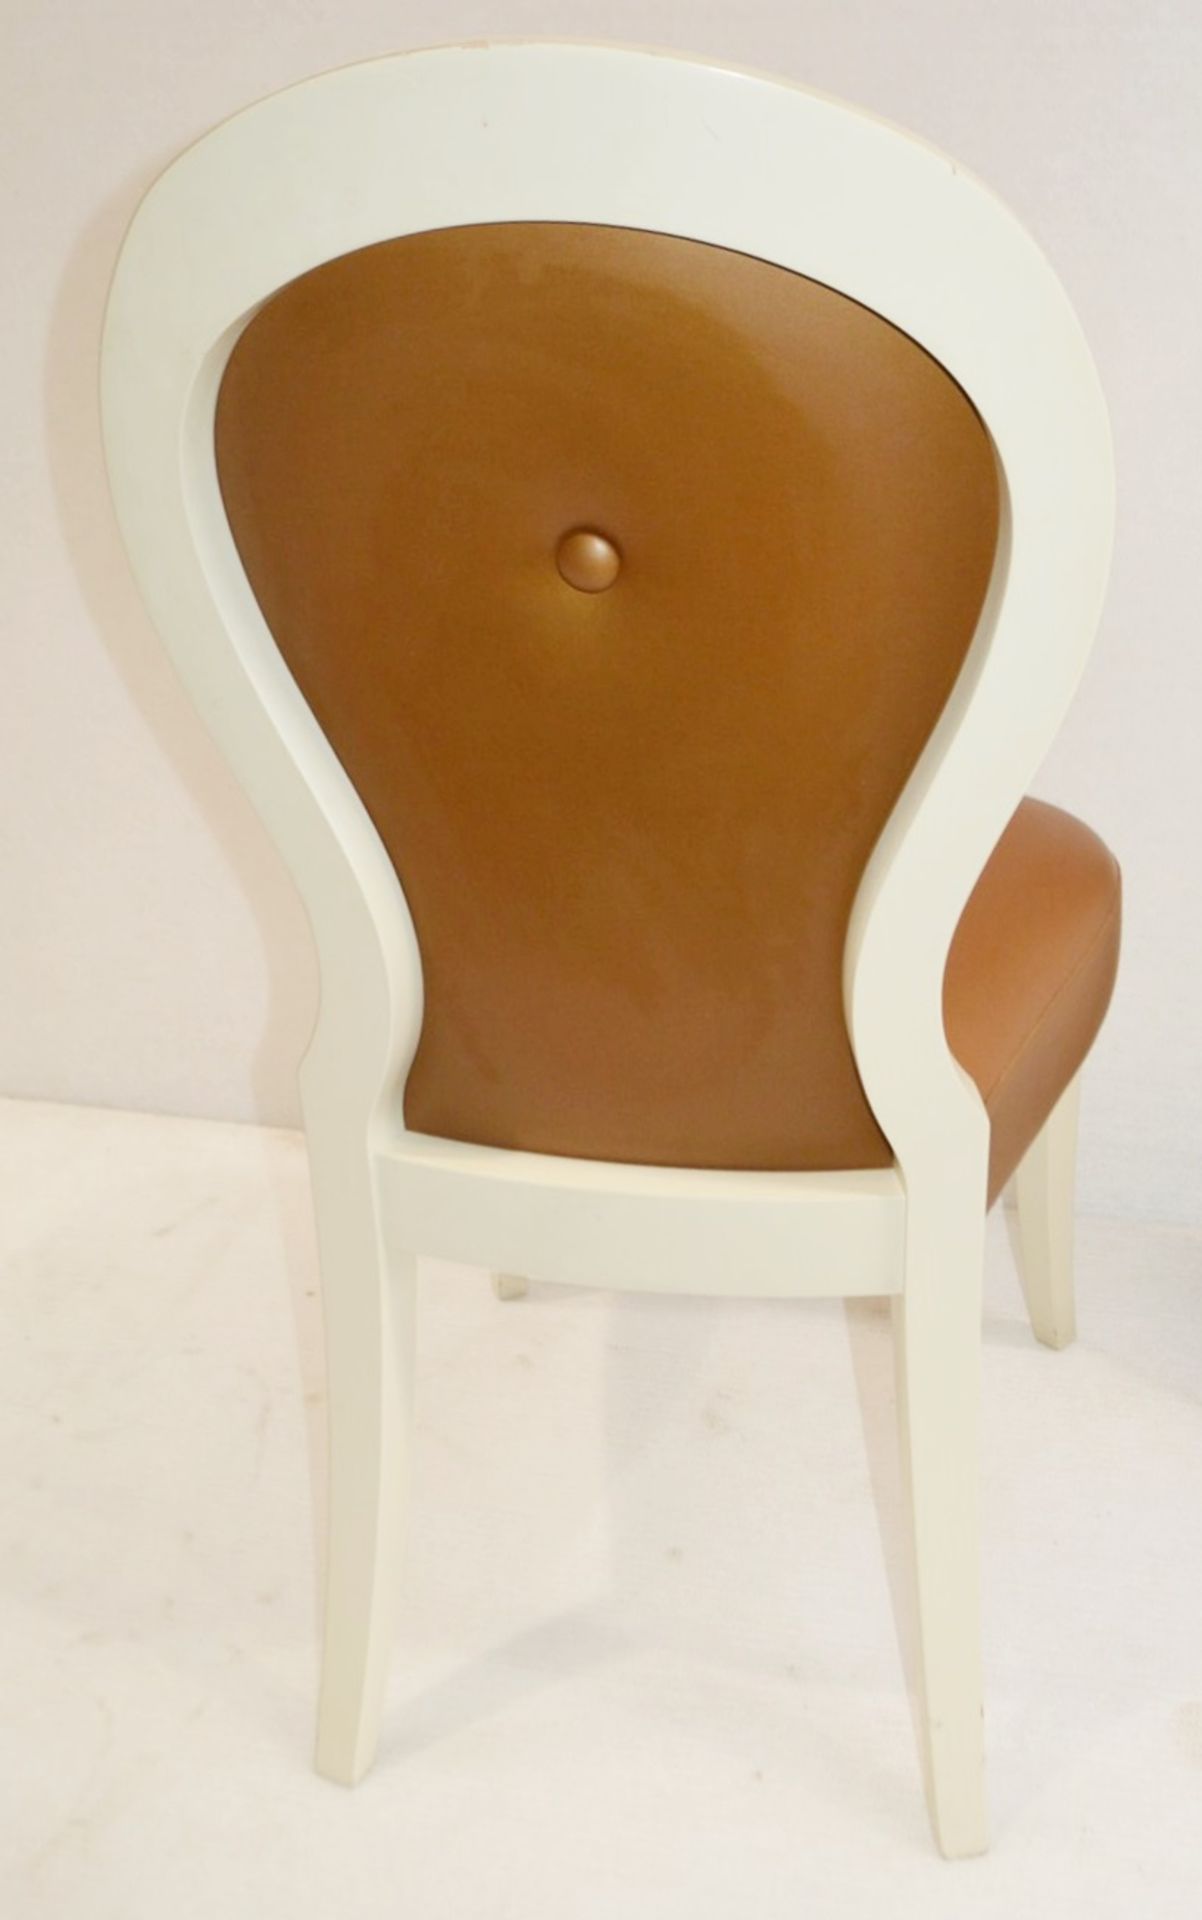 1 x Cushion Backed Chair With Curved Legs - Dimensions: H100 x W49 x D50cm / Seat 48cm - Ref: HMS126 - Image 7 of 7